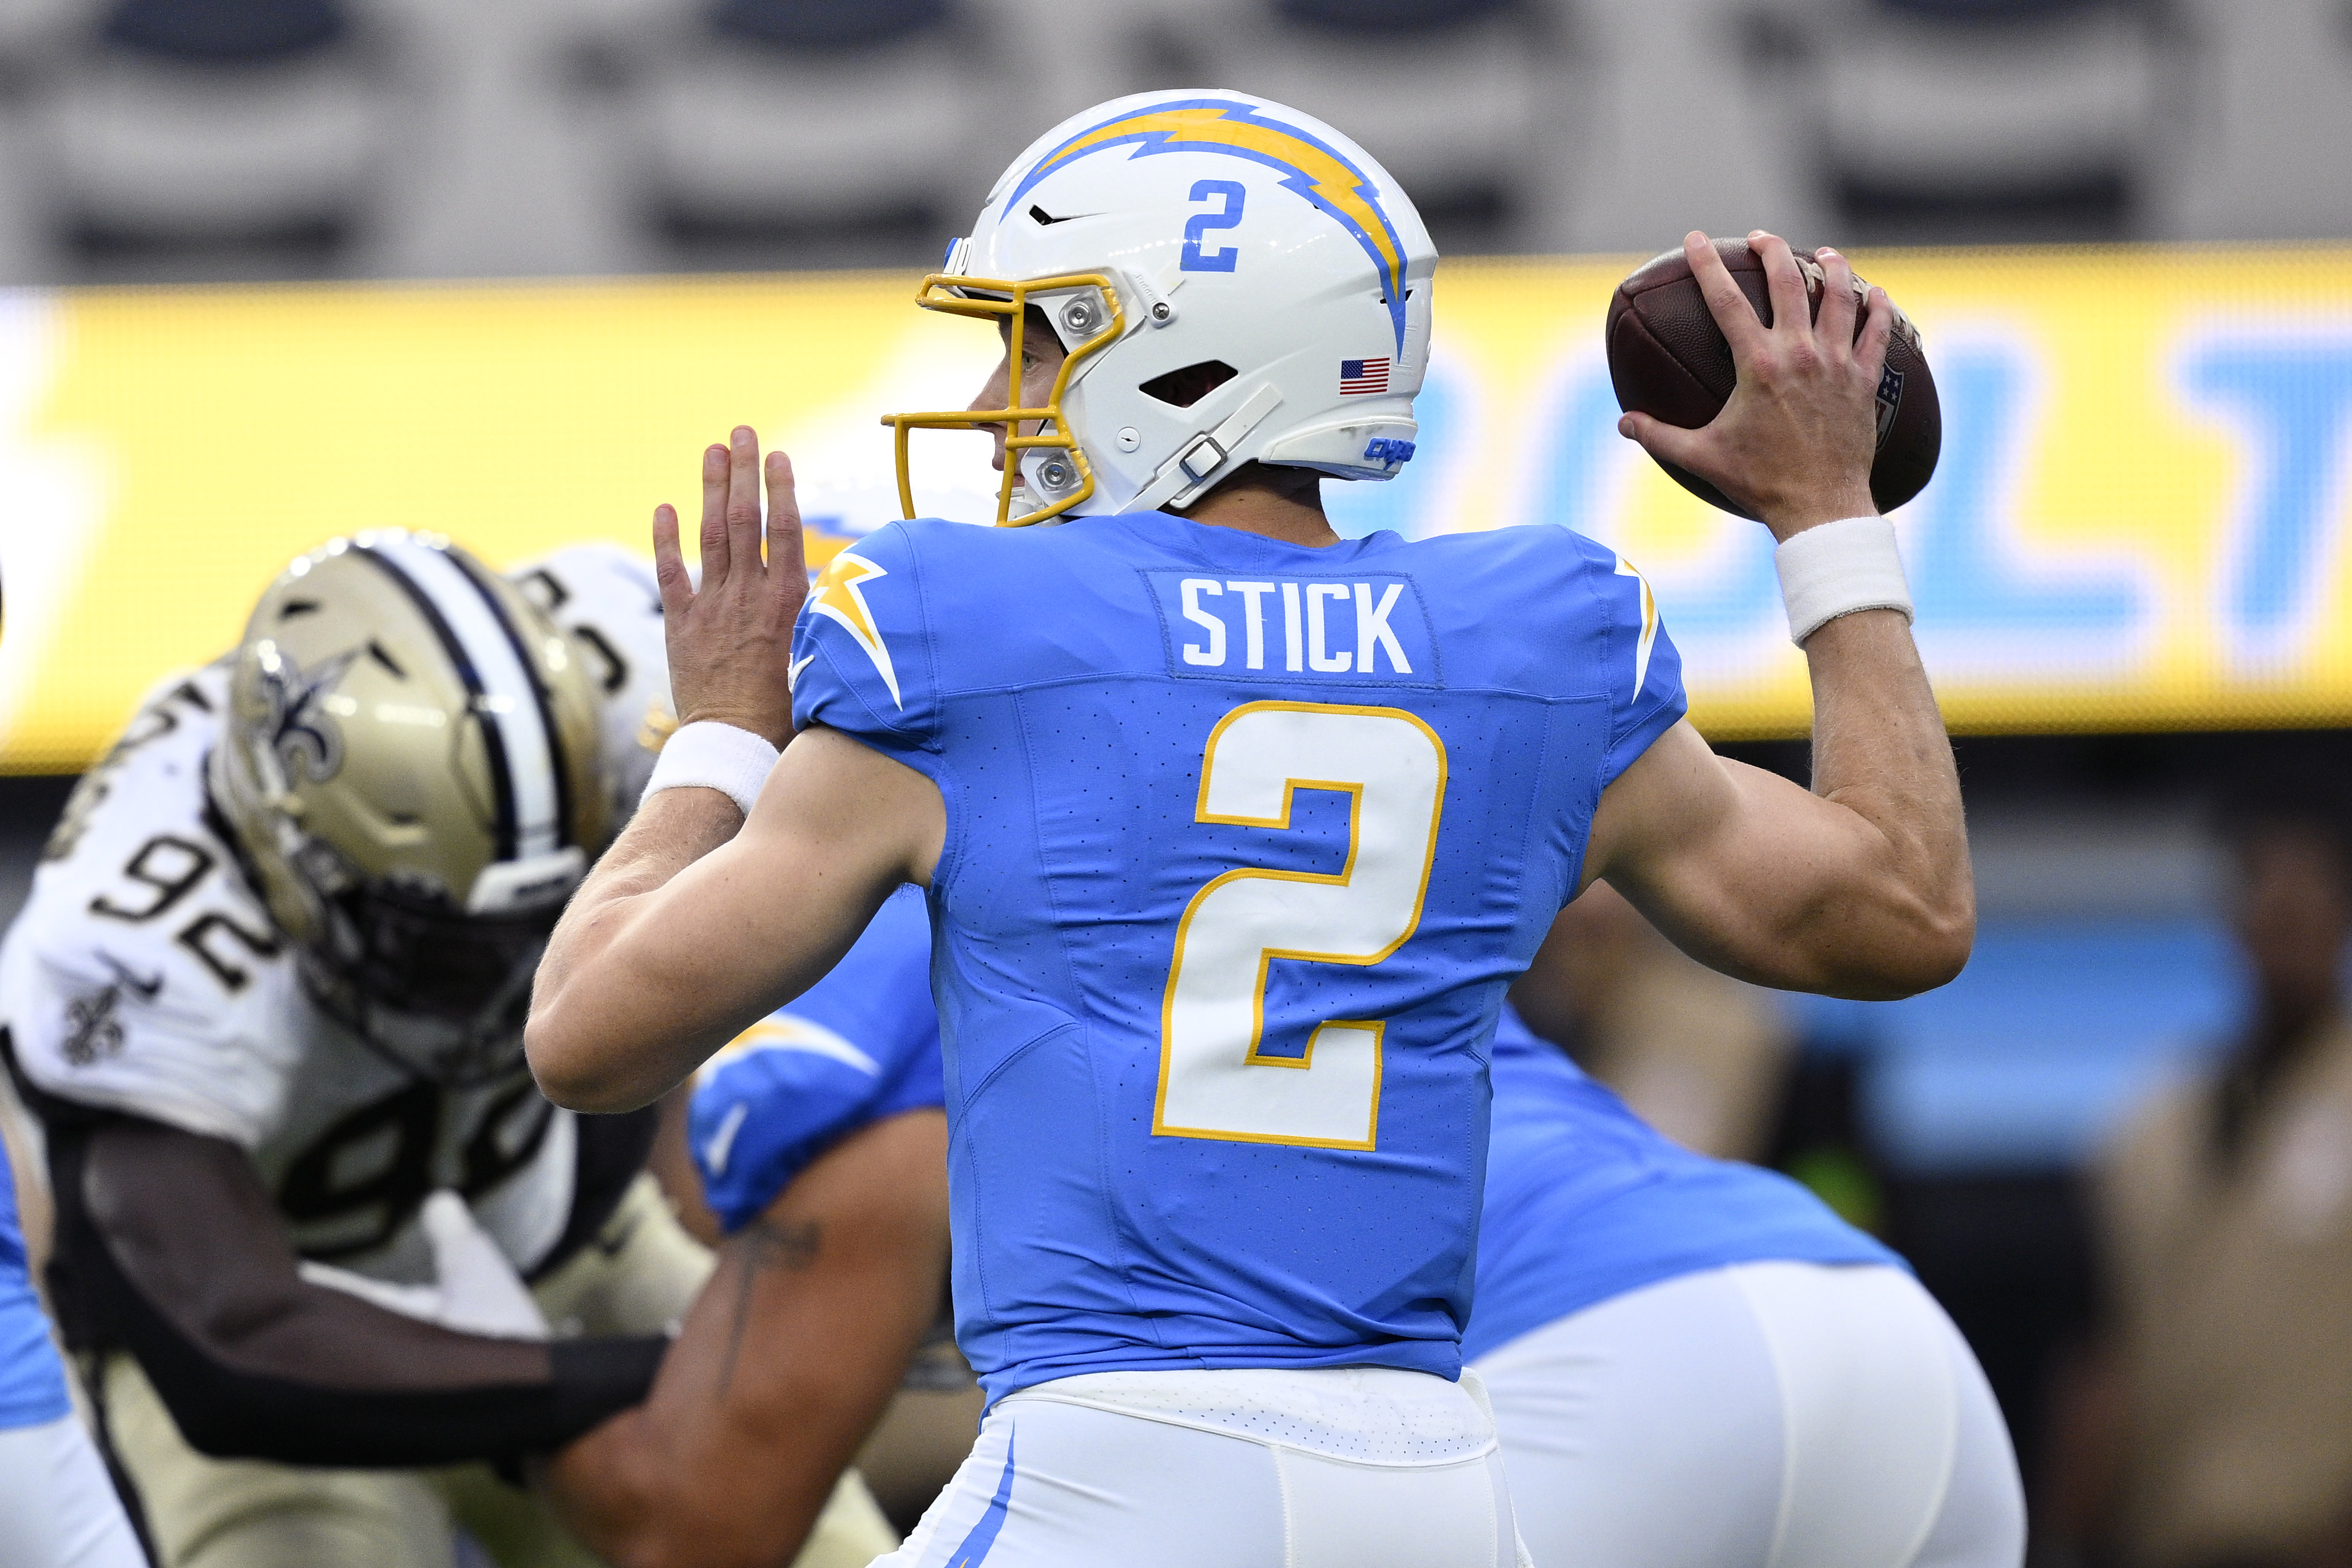 Chargers vs. Saints Recap: Easton Stick struggles in 22-17 loss - Bolts  From The Blue